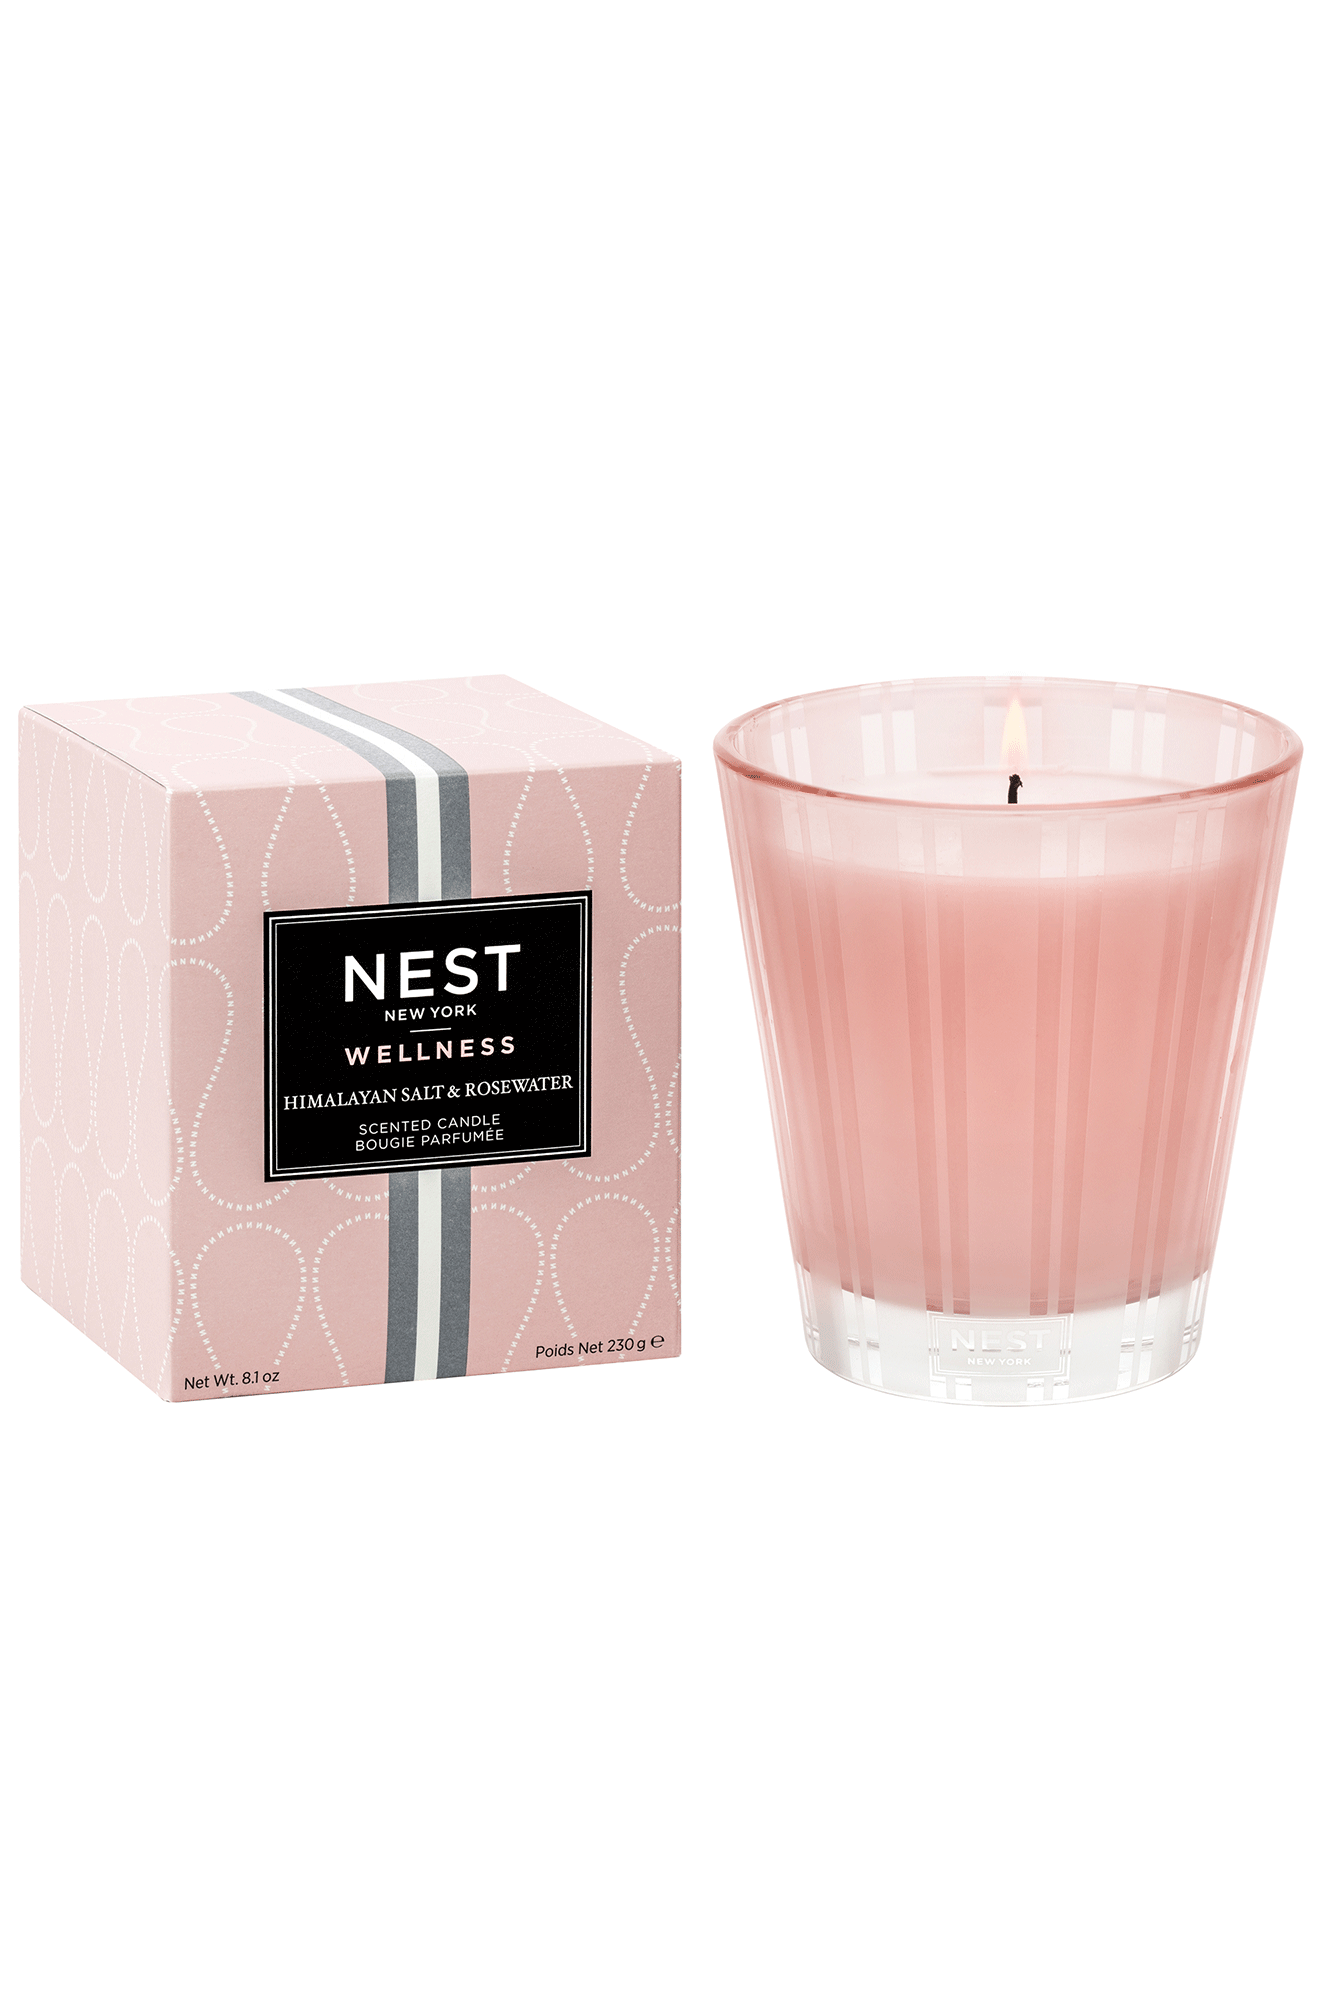 Enjoy a calming atmosphere with the Himalayan Salt & Rosewater Classic Candle from Nest. Infused with notes of rosewater, geranium, salted amber, and white woods, this scented candle will help to ease your mind and soothe your spirit.